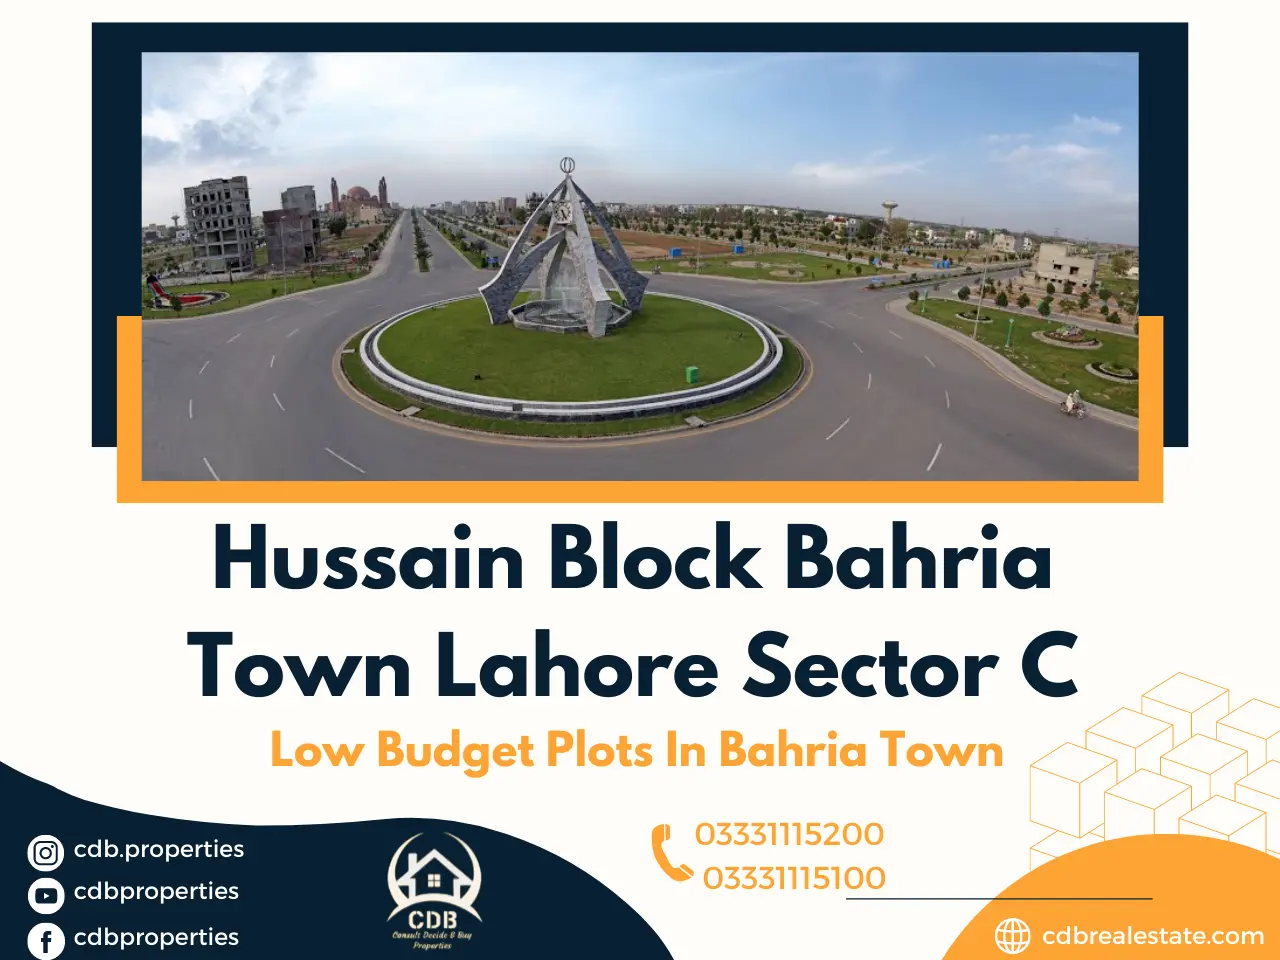 Hussain Block Bahria Town Lahore - Low Budget Plots In Bahria Town